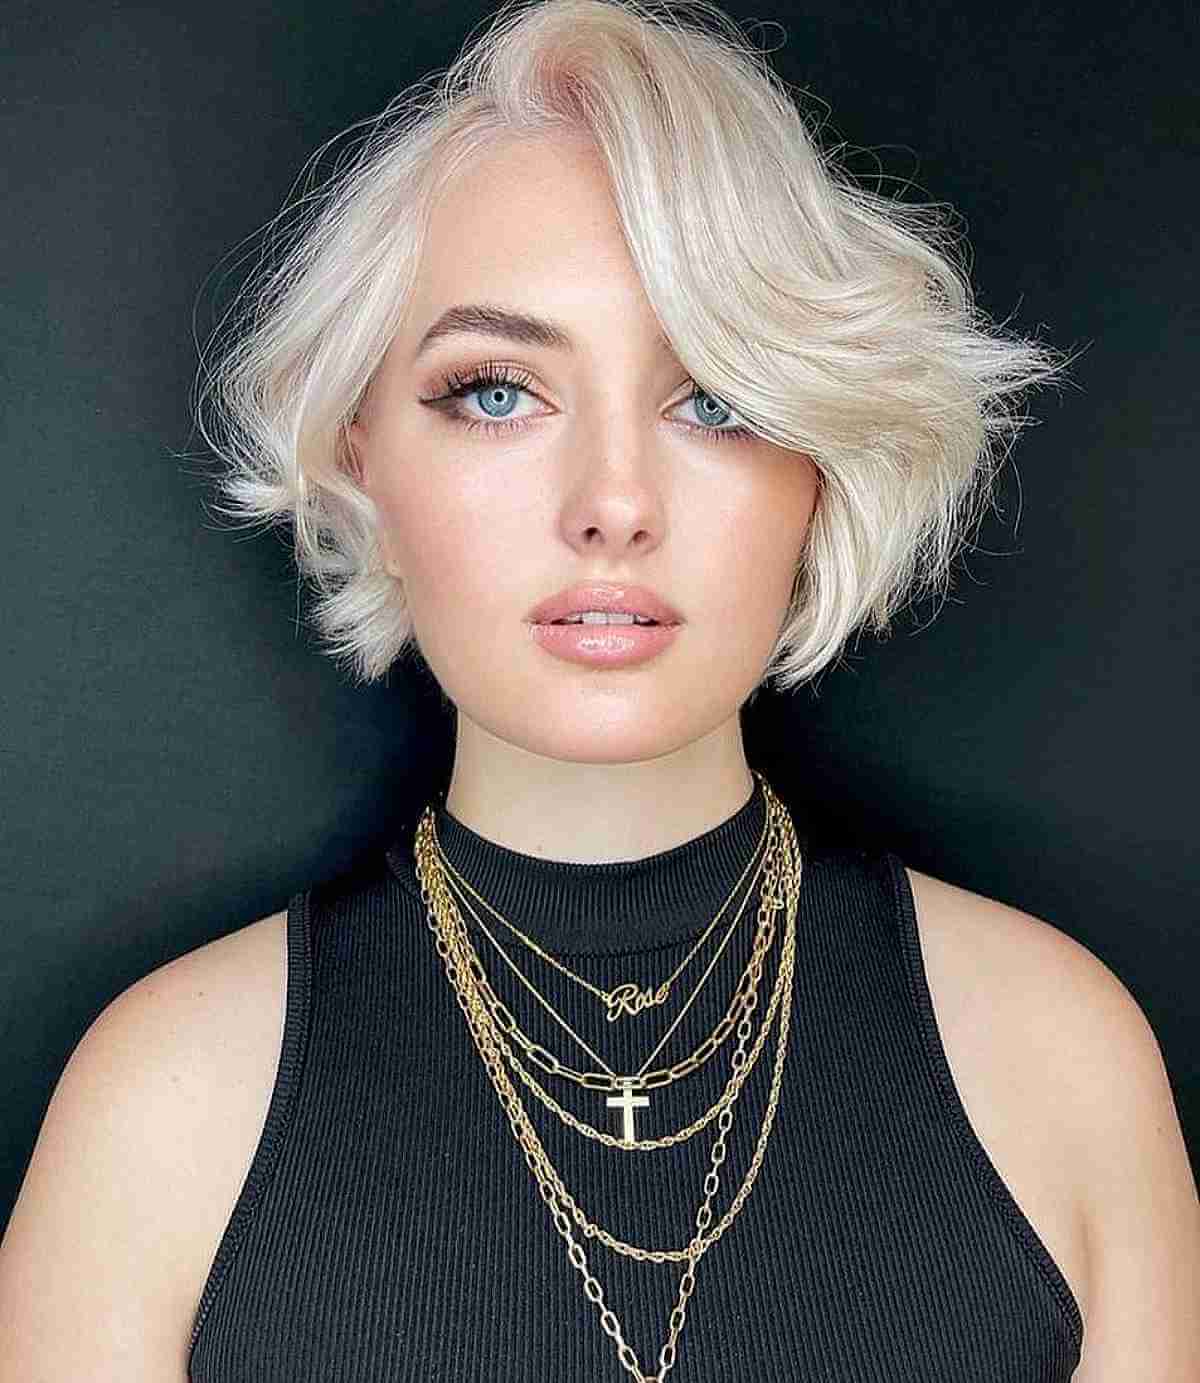 23 Cute Bob With Side Bangs You&#039;ll Want to Try in 2023